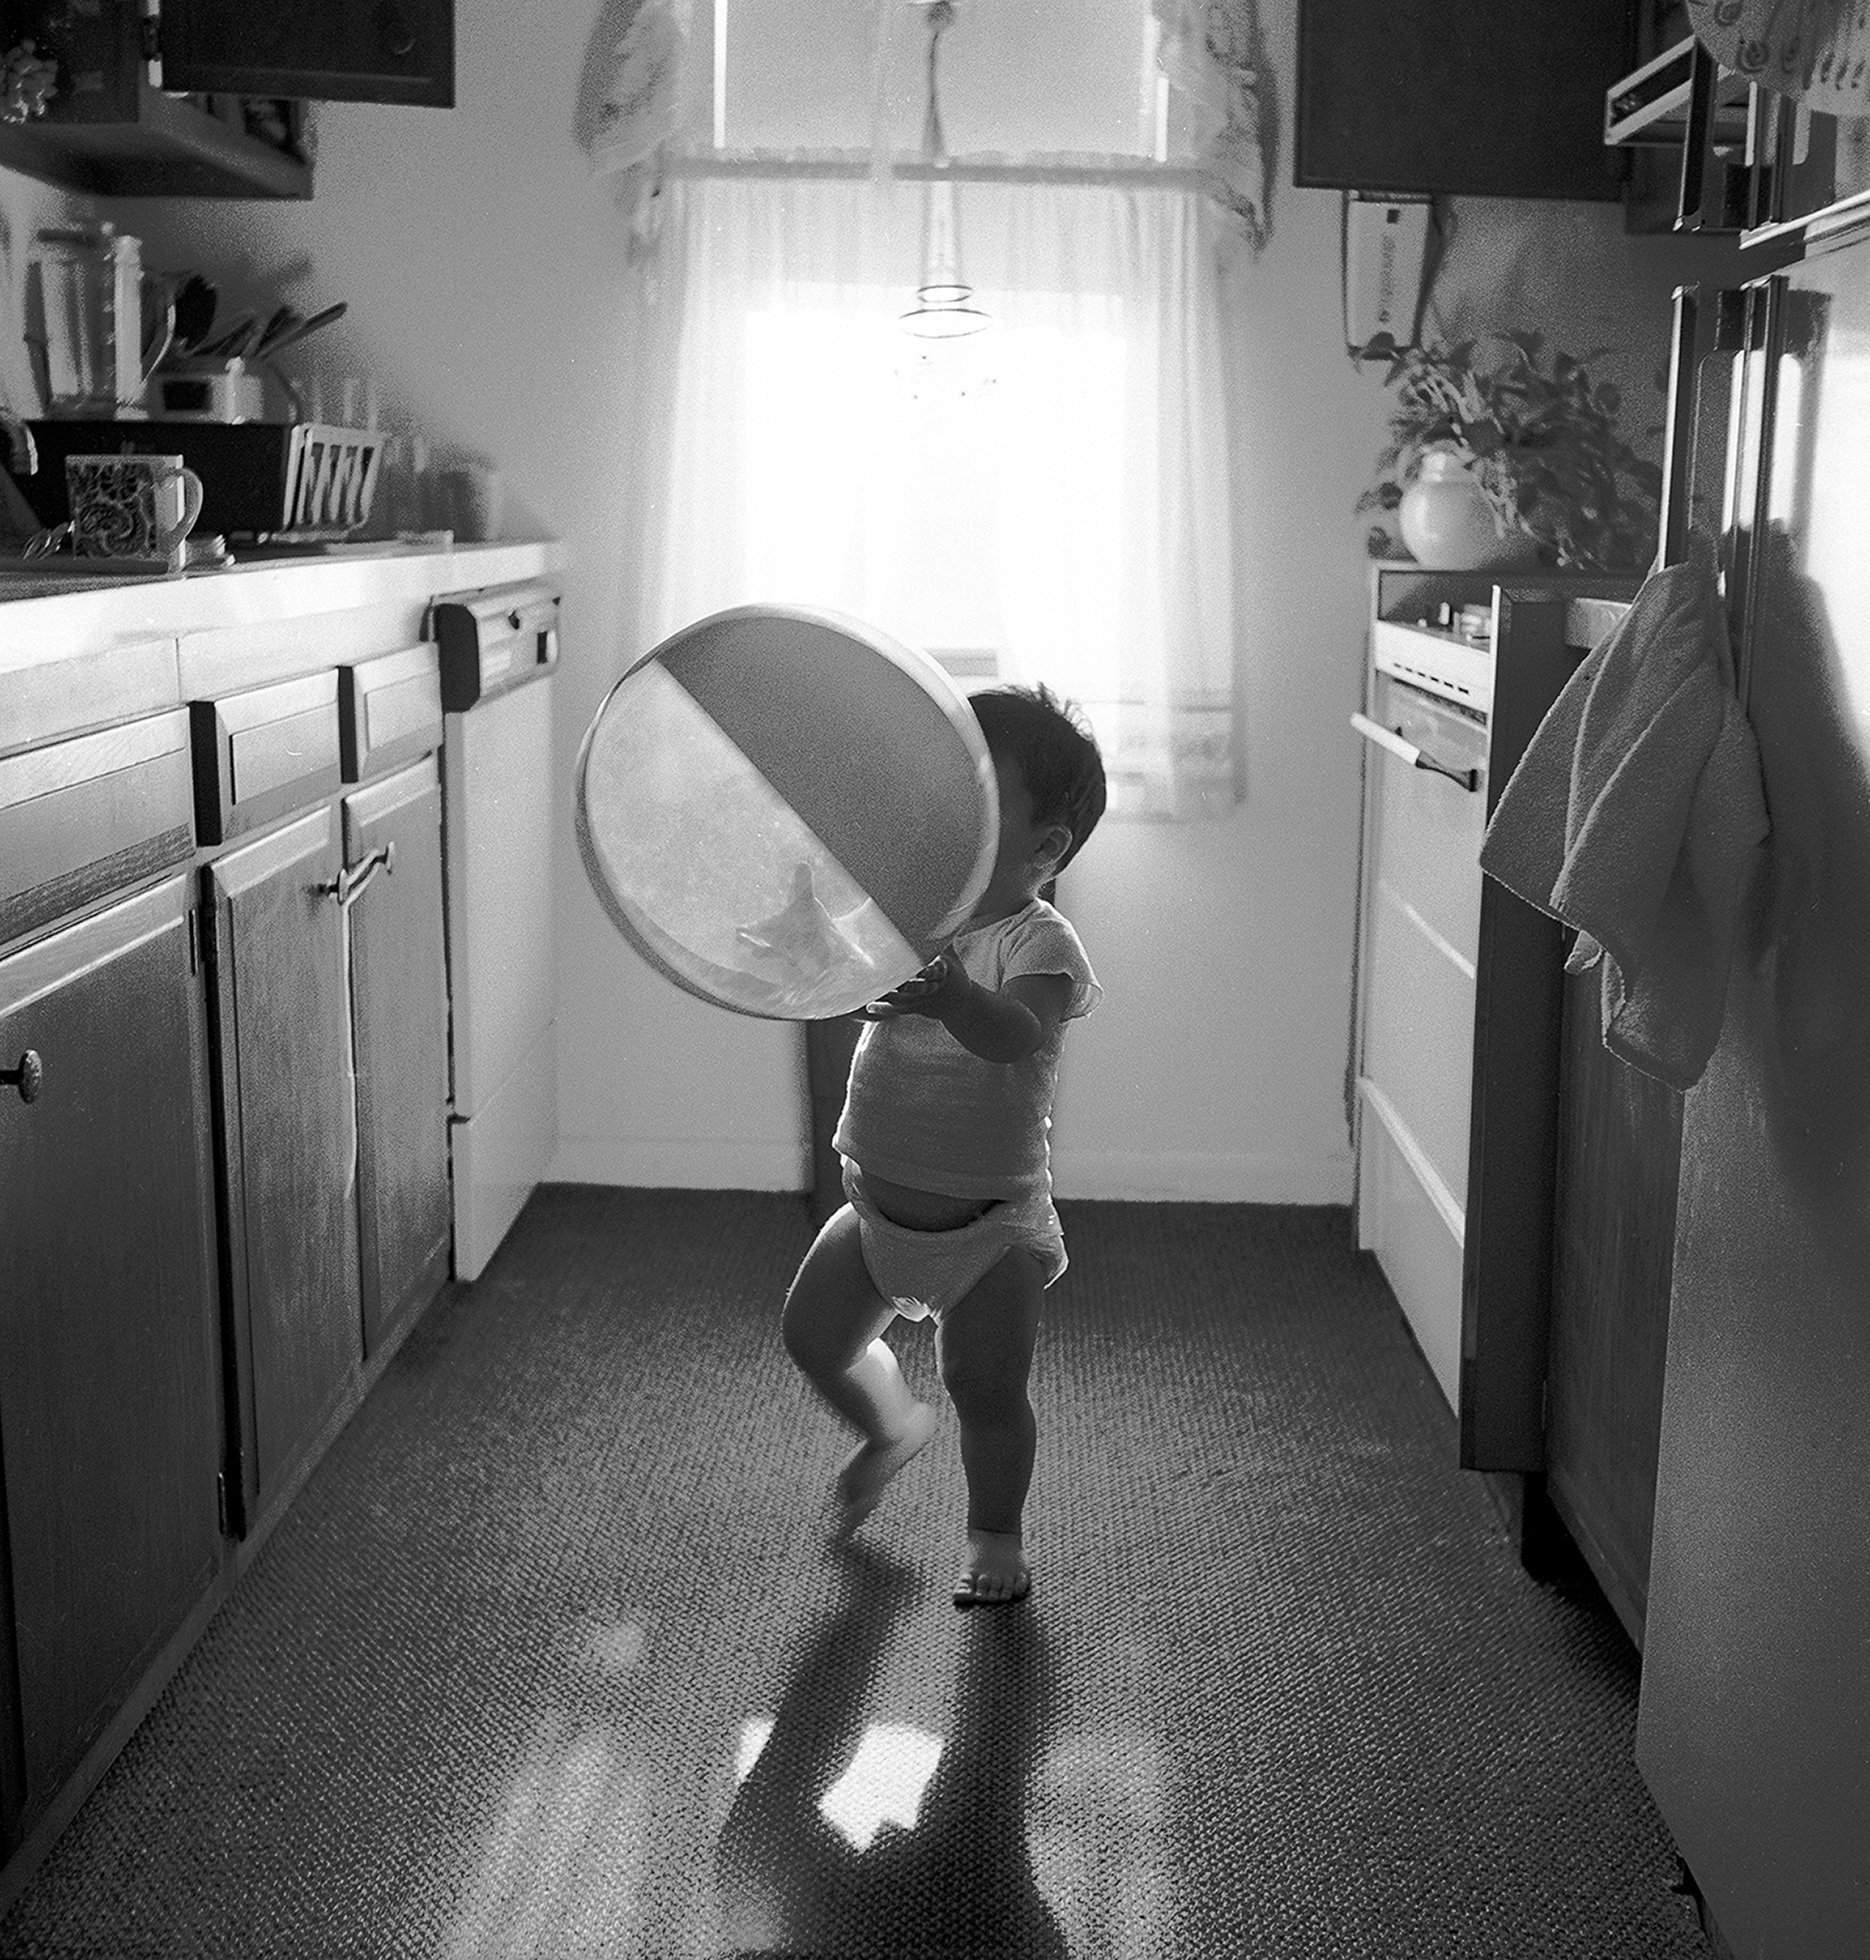 A barefooted toddler in a diaper and undershirt stands in a clean, bright, galley kitchen holding a large bowl.